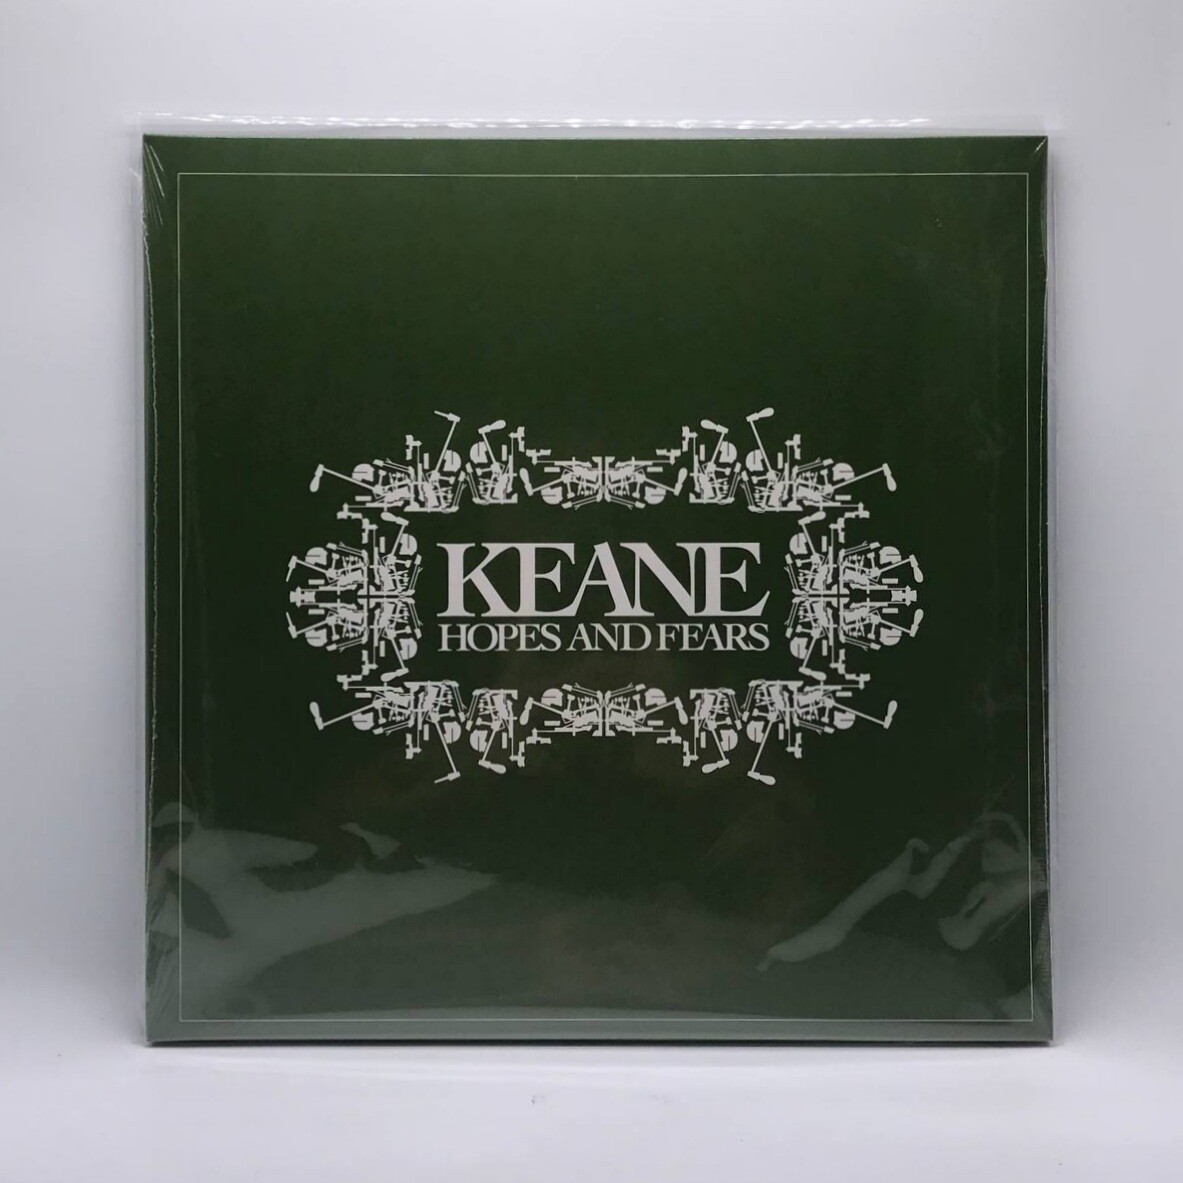 KEANE -HOPES AND FEARS- LP